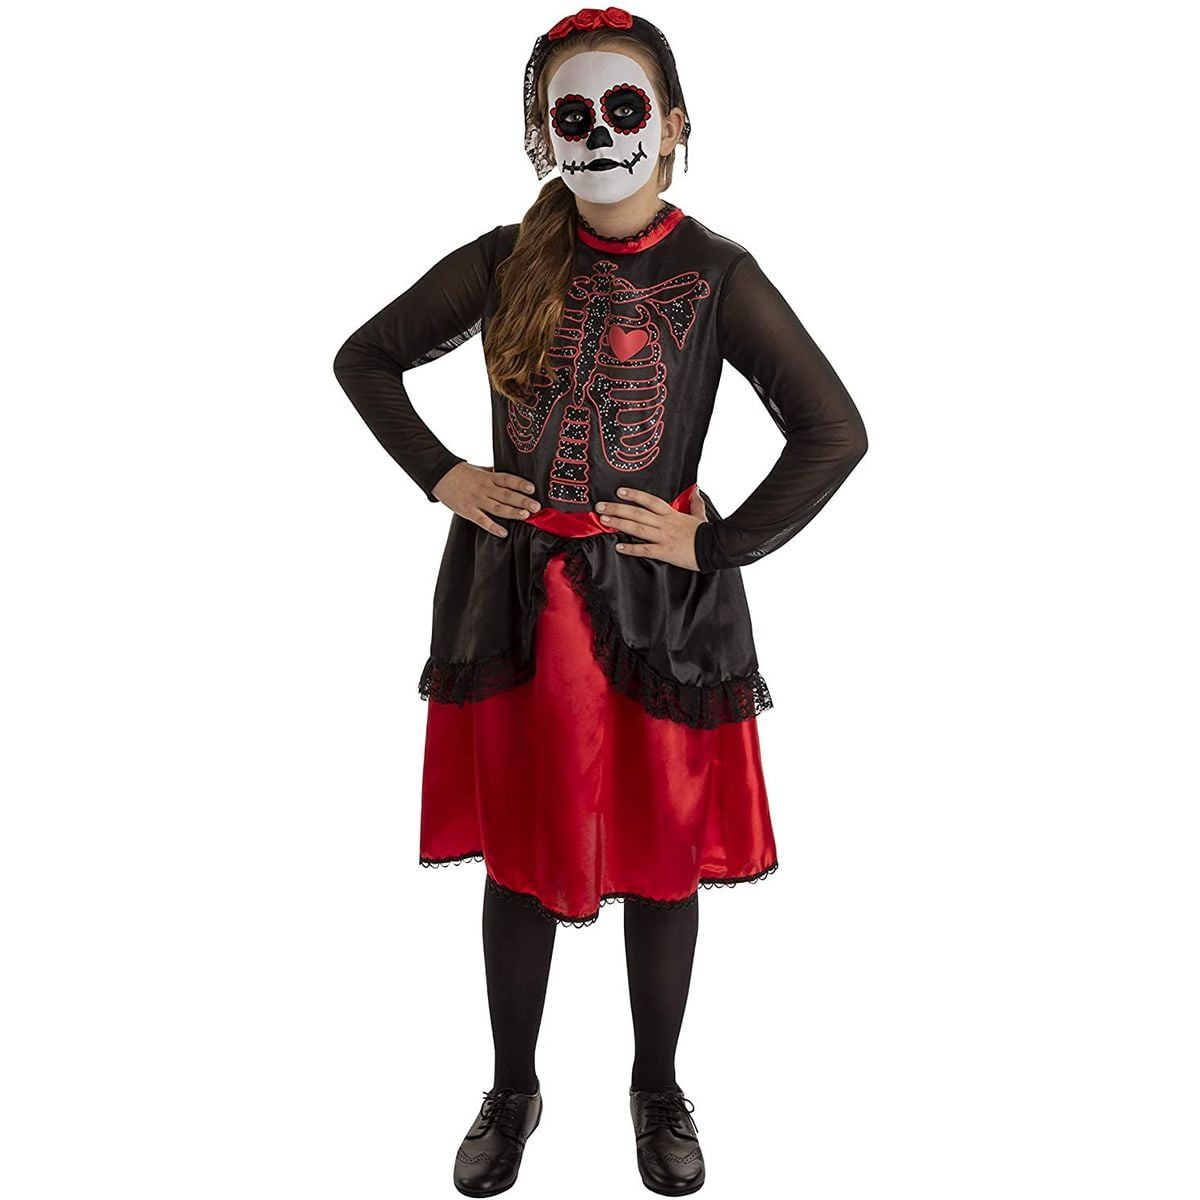 GIRLS SUGAR SKULL COSTUME CHILD DAY OF THE DEAD HALLOWEEN FANCY DRESS OUTFIT 